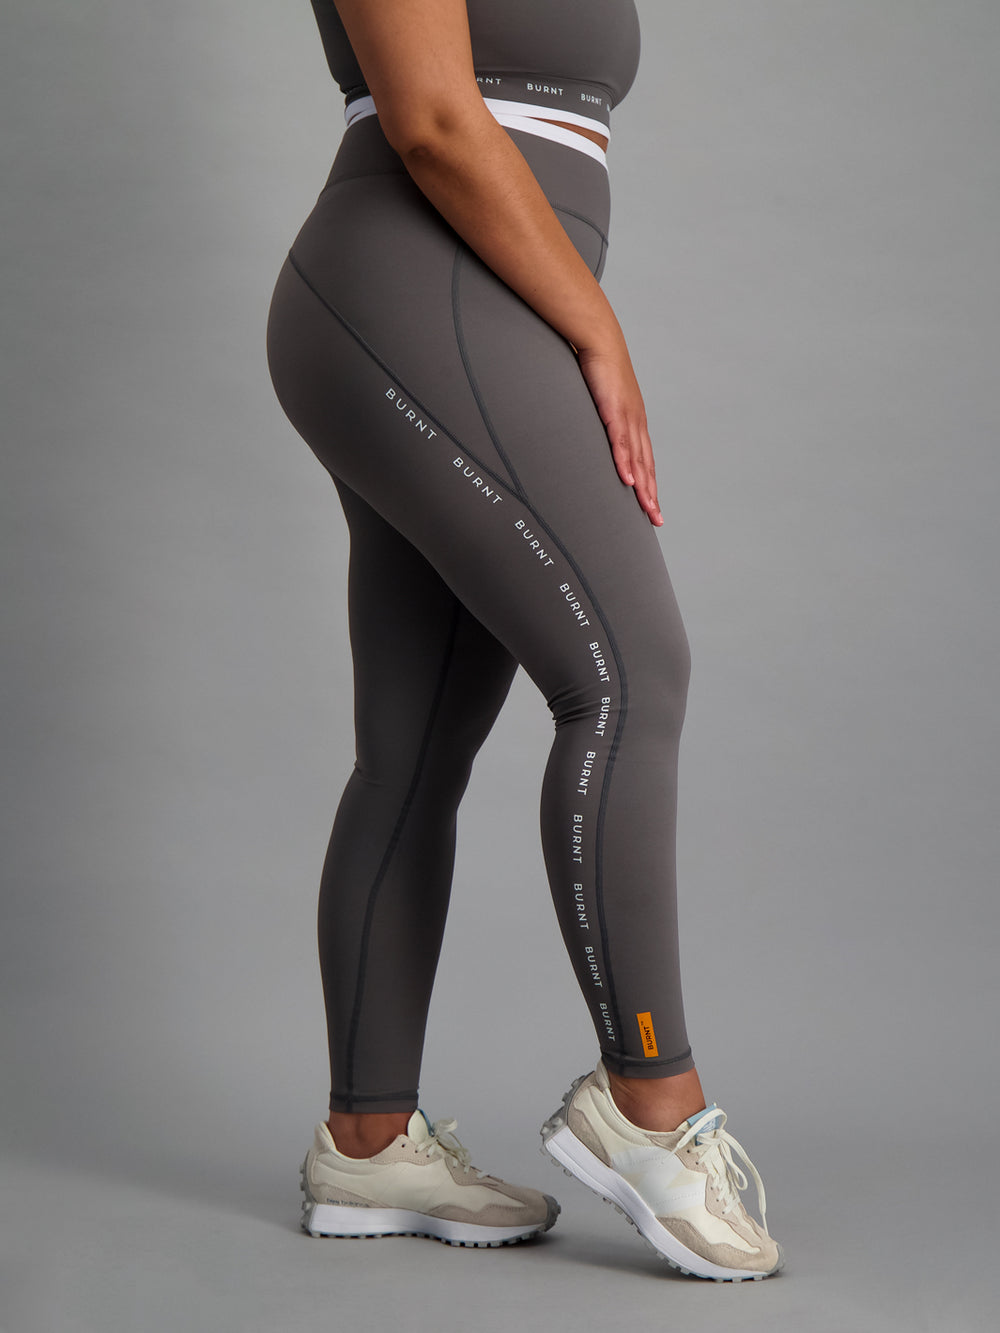 Chelsea Tights - Charcoal Grey